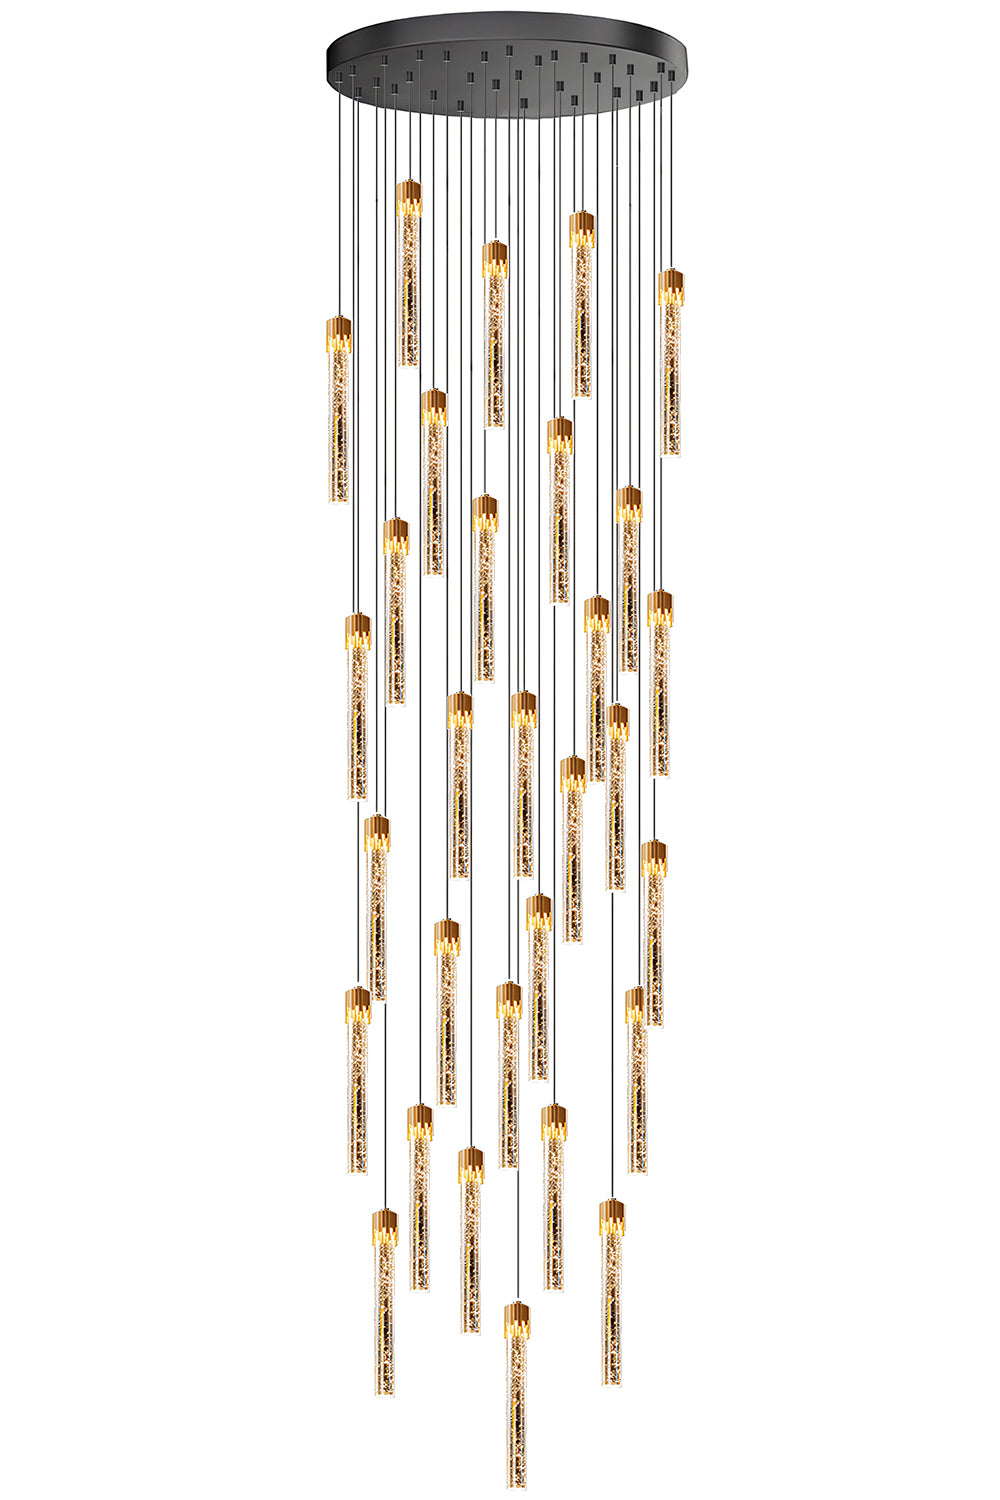 Modern gold bubble crystal pendant light with 30 lights, a stunning centerpiece.